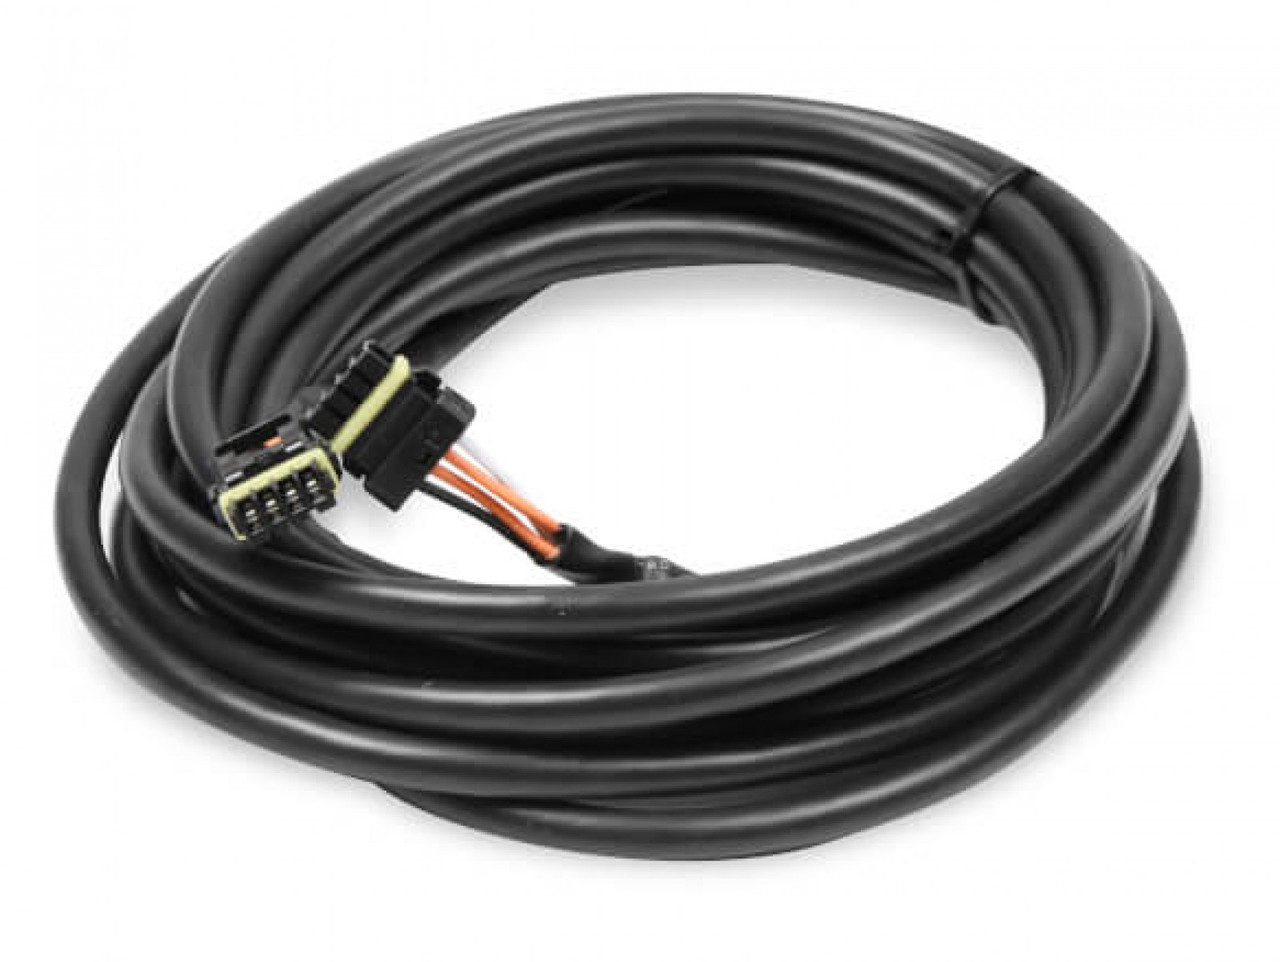 Holley EFI CAN EXTENSION HARNESS, 12FT (HOE-2558-426)